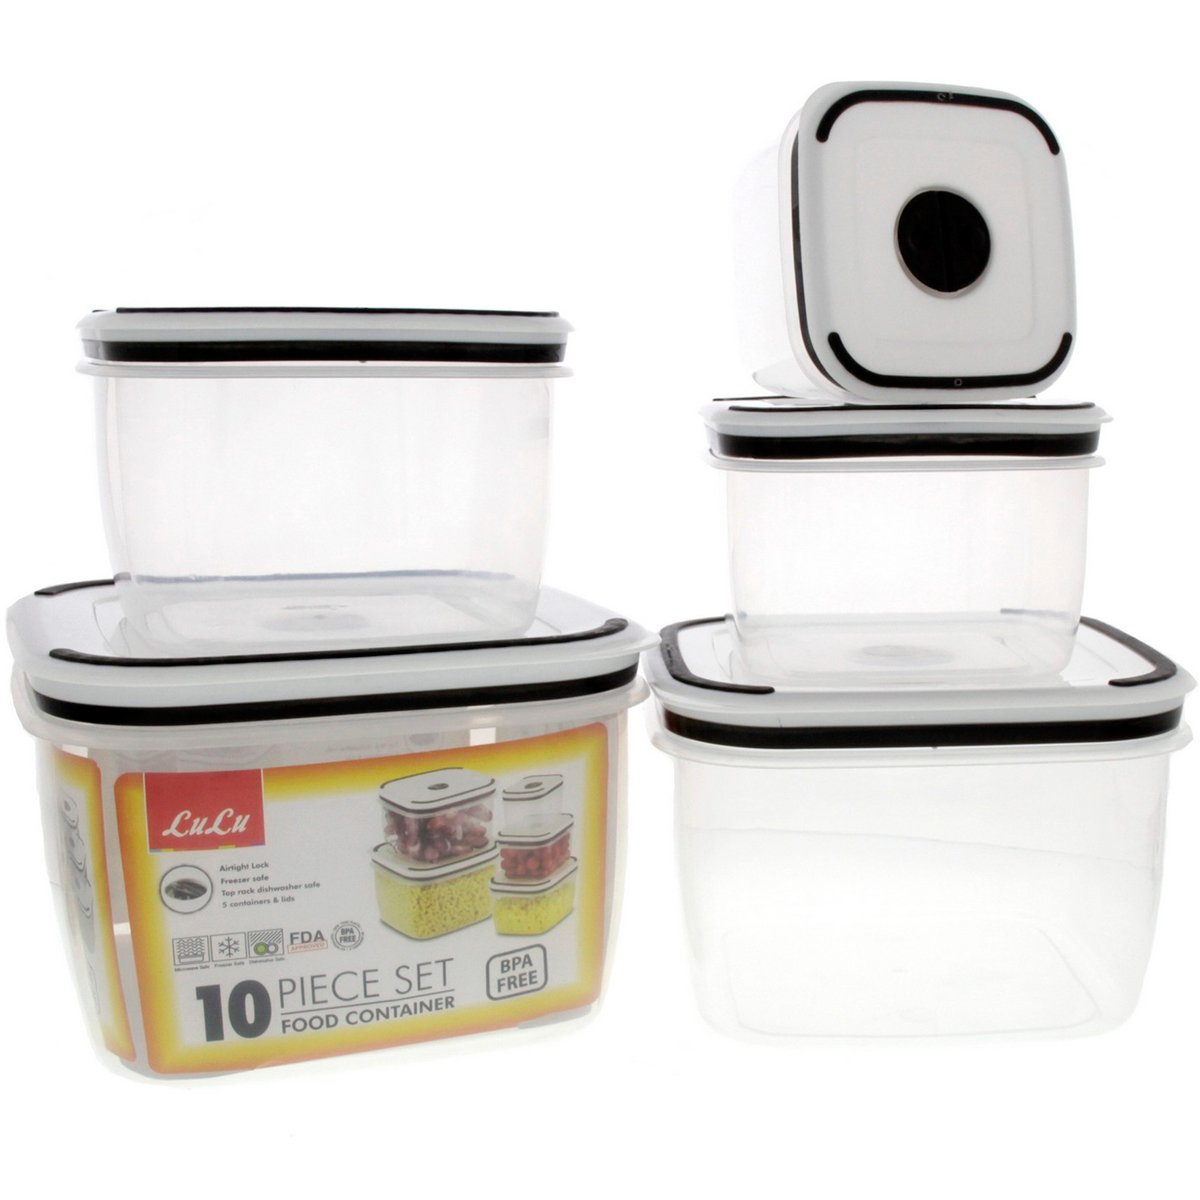 LuLu Food Container 5pcs